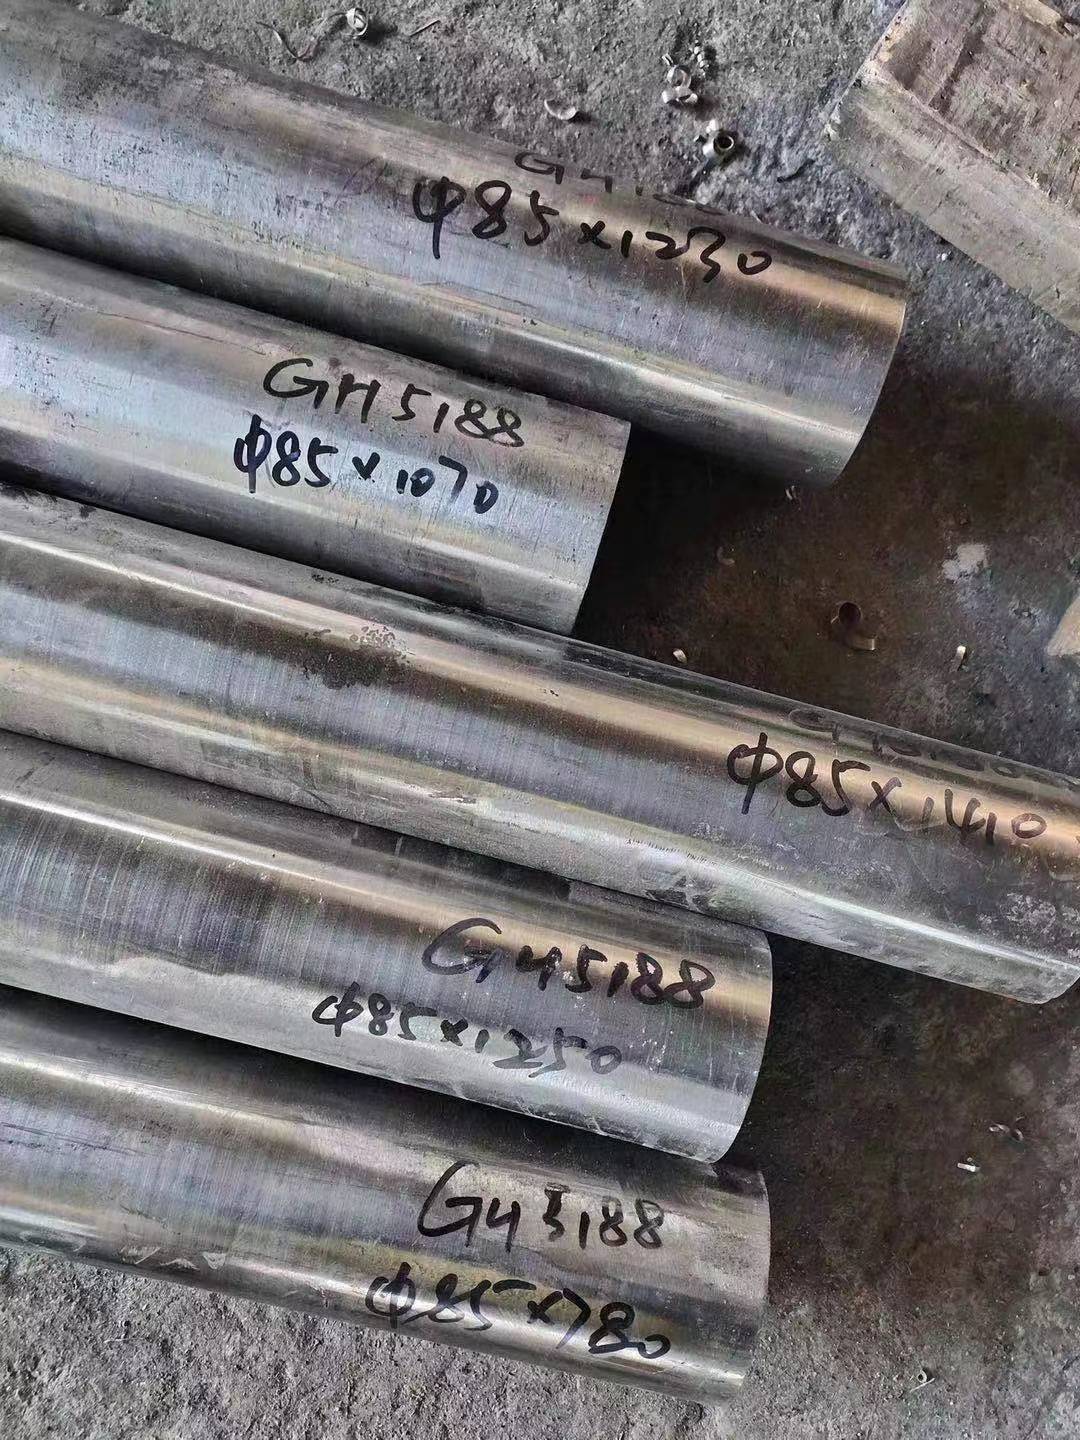 OEM/ODM Manufacturer Stainless Steel Strip Malaysia - Hastelloy188 Alloy188 Gh5188/Gh188 Uns R30188 Haynes No. 188/Ha188 Alloy Tube/Pipe – Cepheus